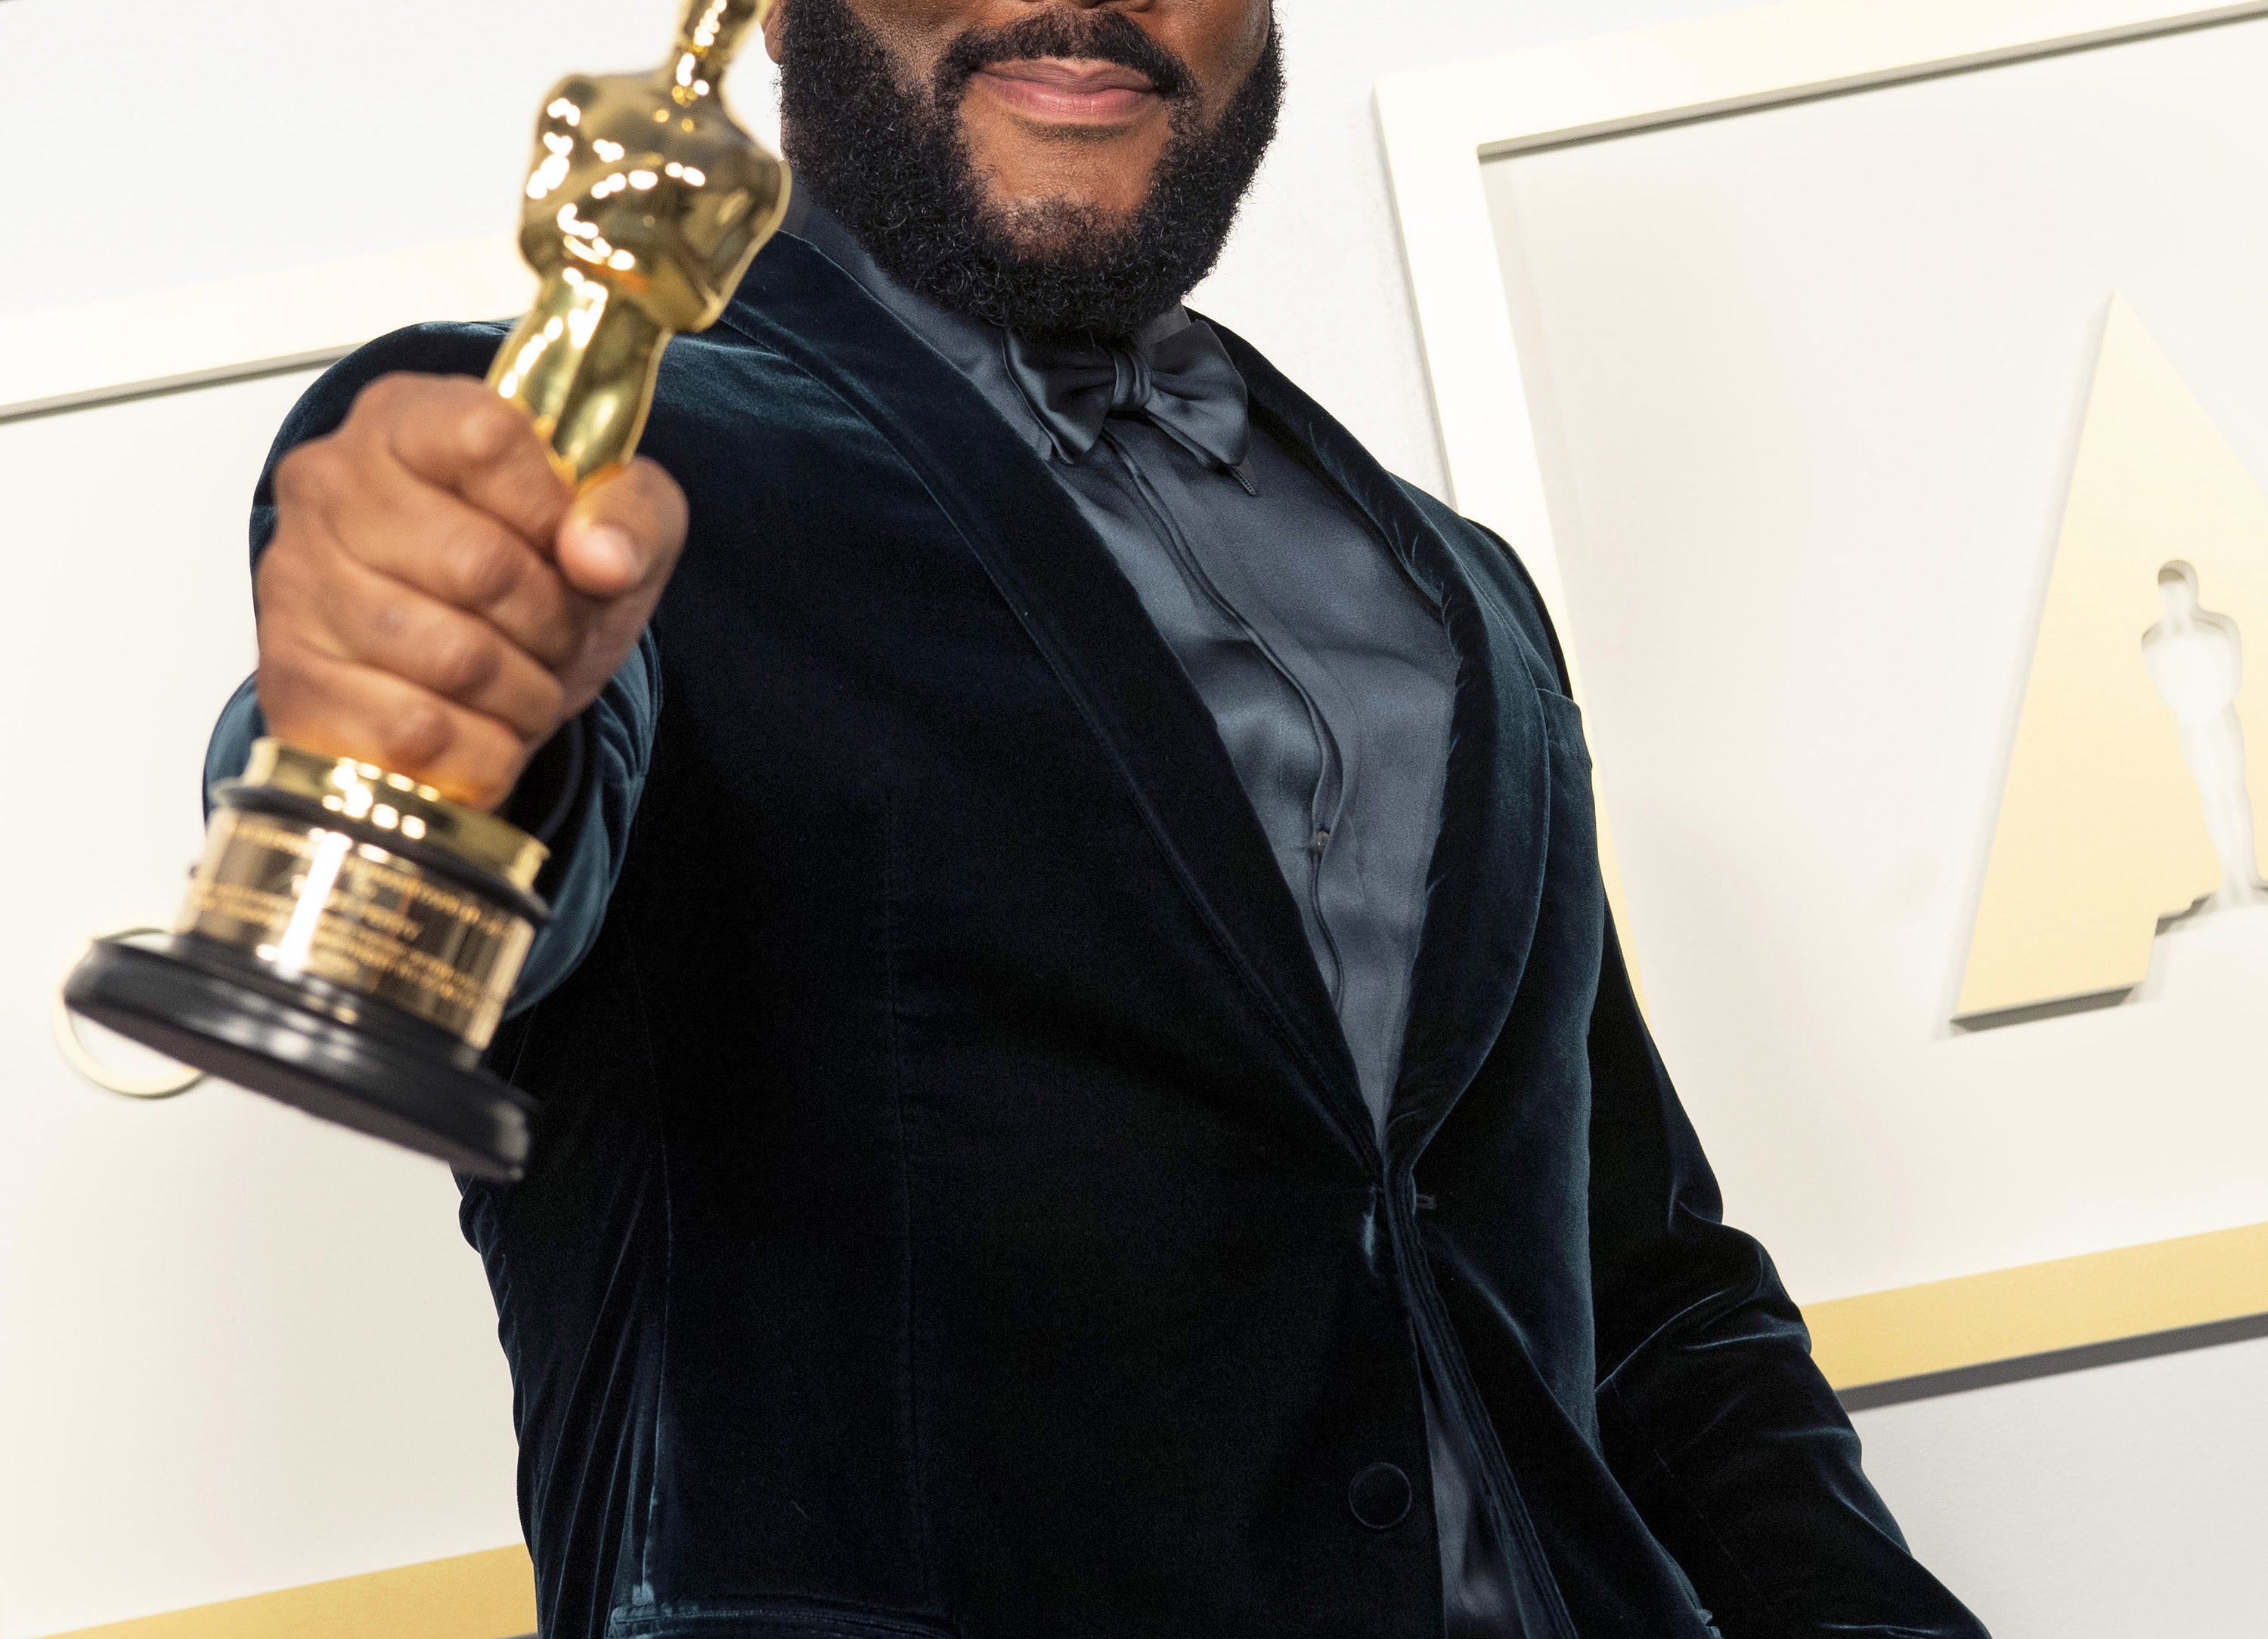 Tyler Perry, winner of the Jean Hersholt Humanitarian Award, poses in the press room during the 93rd Annual Academy Awards at Union Station on April 25, 2021 in Los Angeles, California.